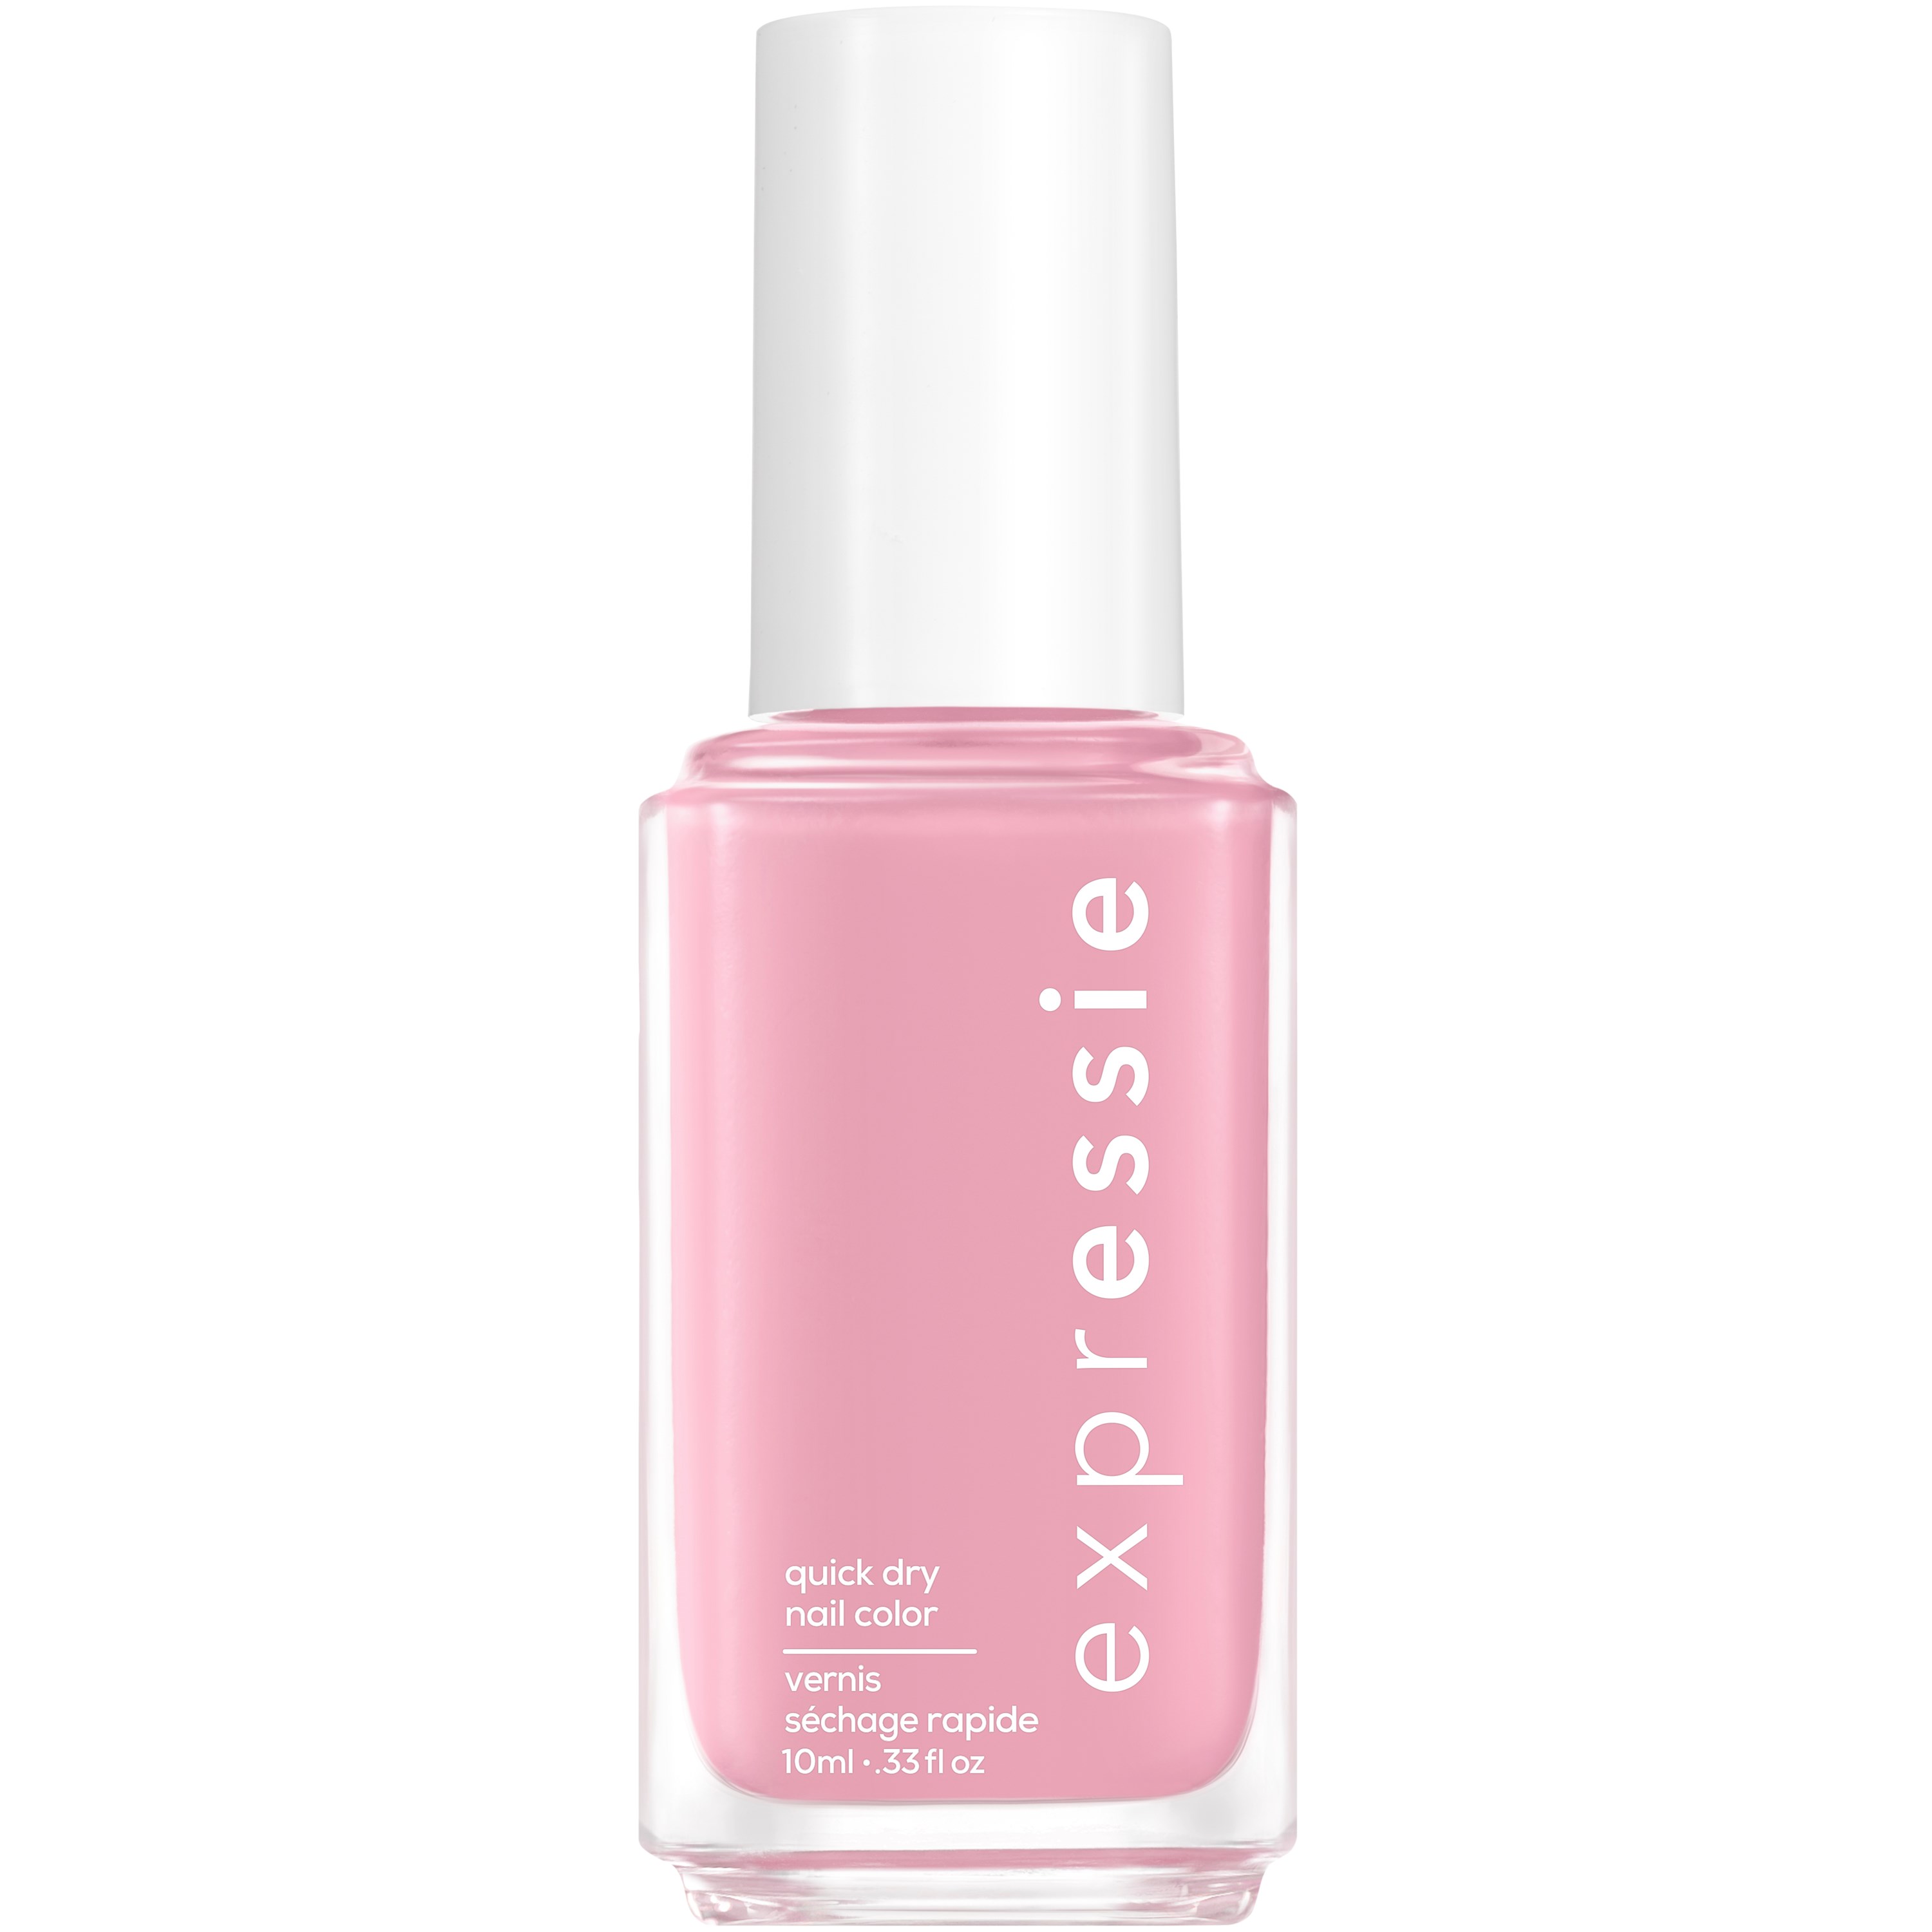 Bilde av Essie Expressie Quick Dry Nail Color In The Time Zone 200